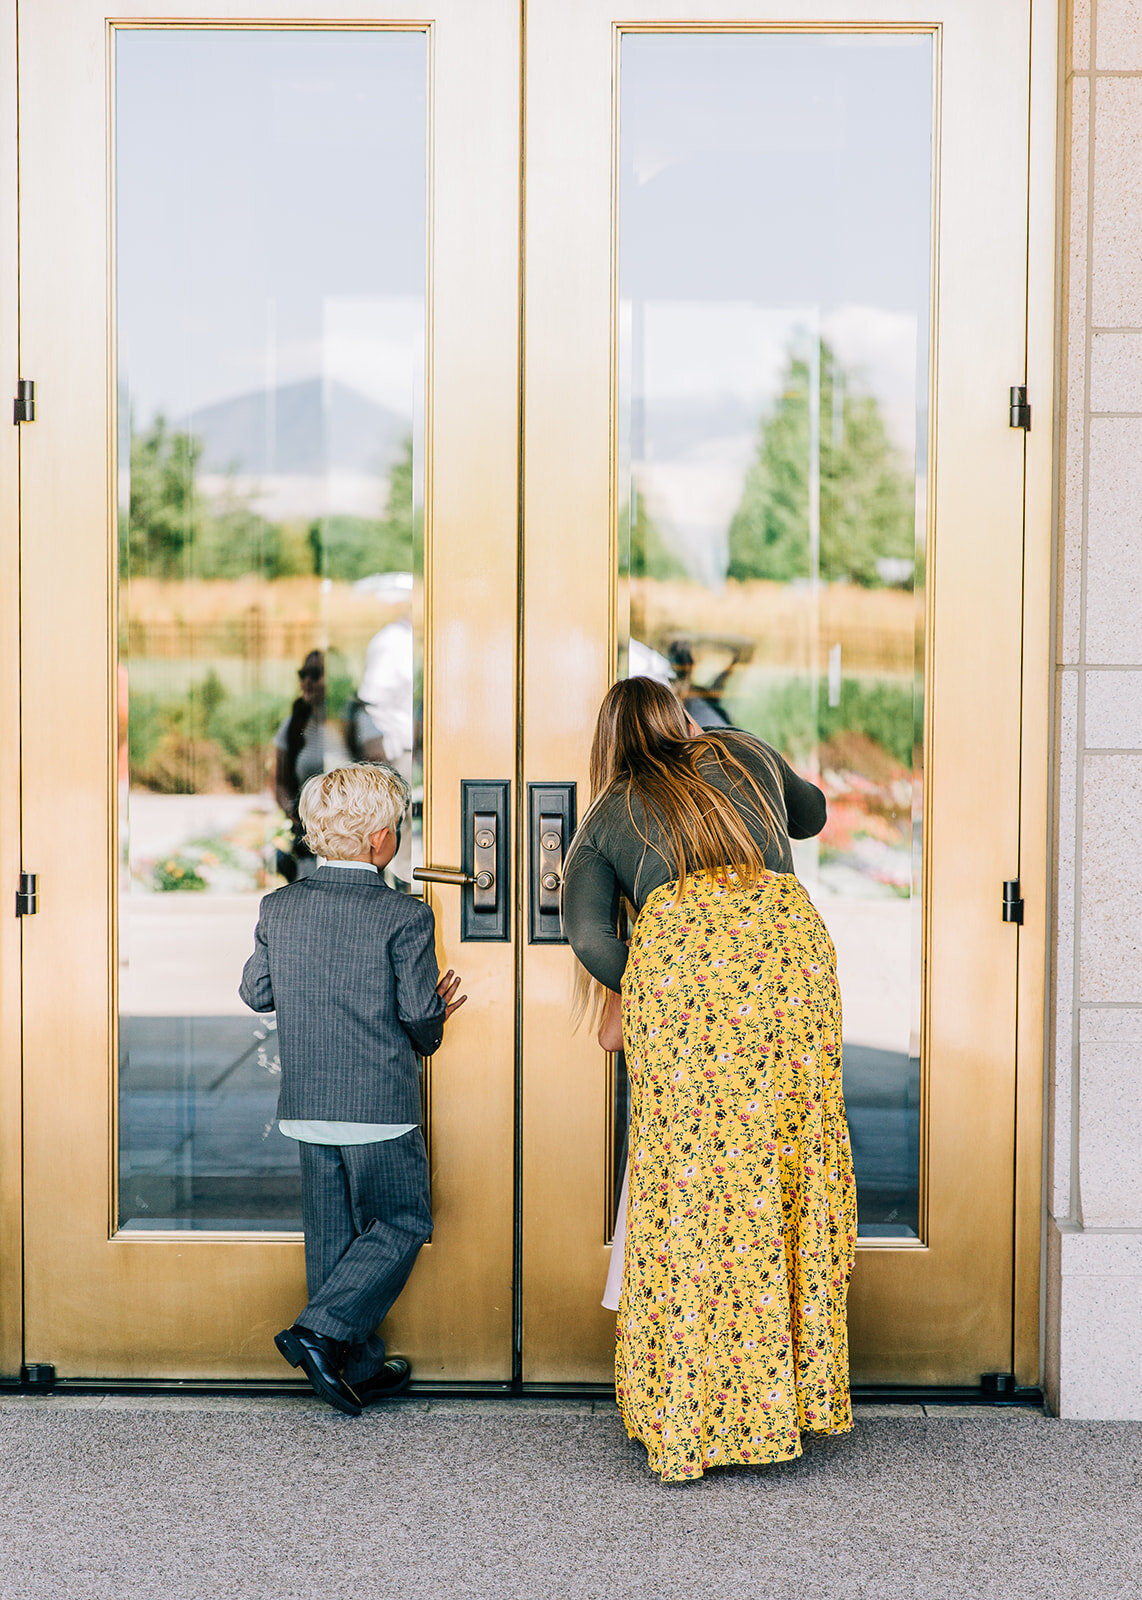  young boy and girl peeking in the windows of the temple waiting for the bride and groom to exit lds family lds wedding sealing ceremony mormon wedding gold doors salt lake city temple marriage lds wedding photographer oquirrh mountain temple south j